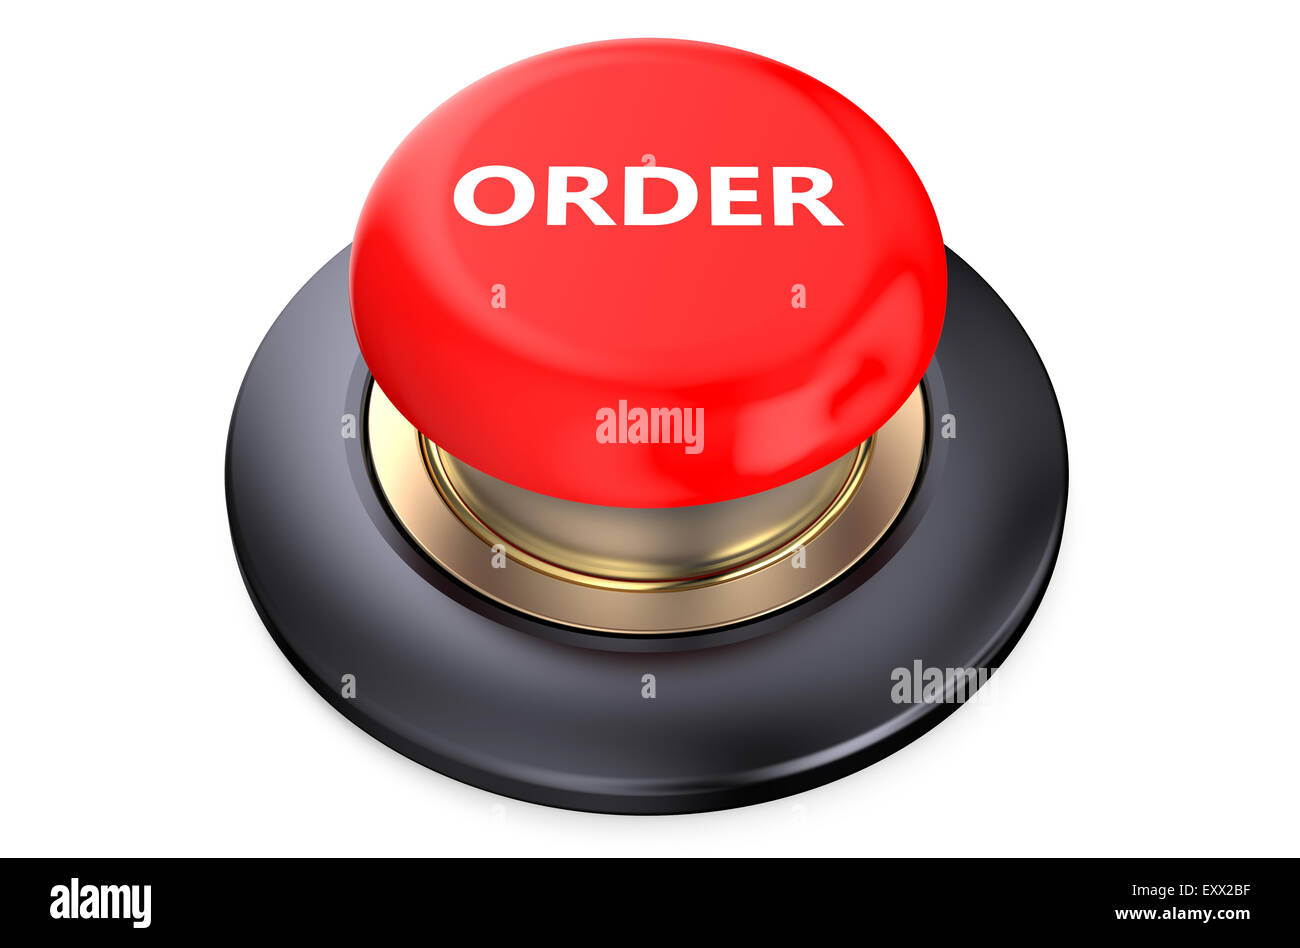 Order Red button isolated on white background Stock Photo